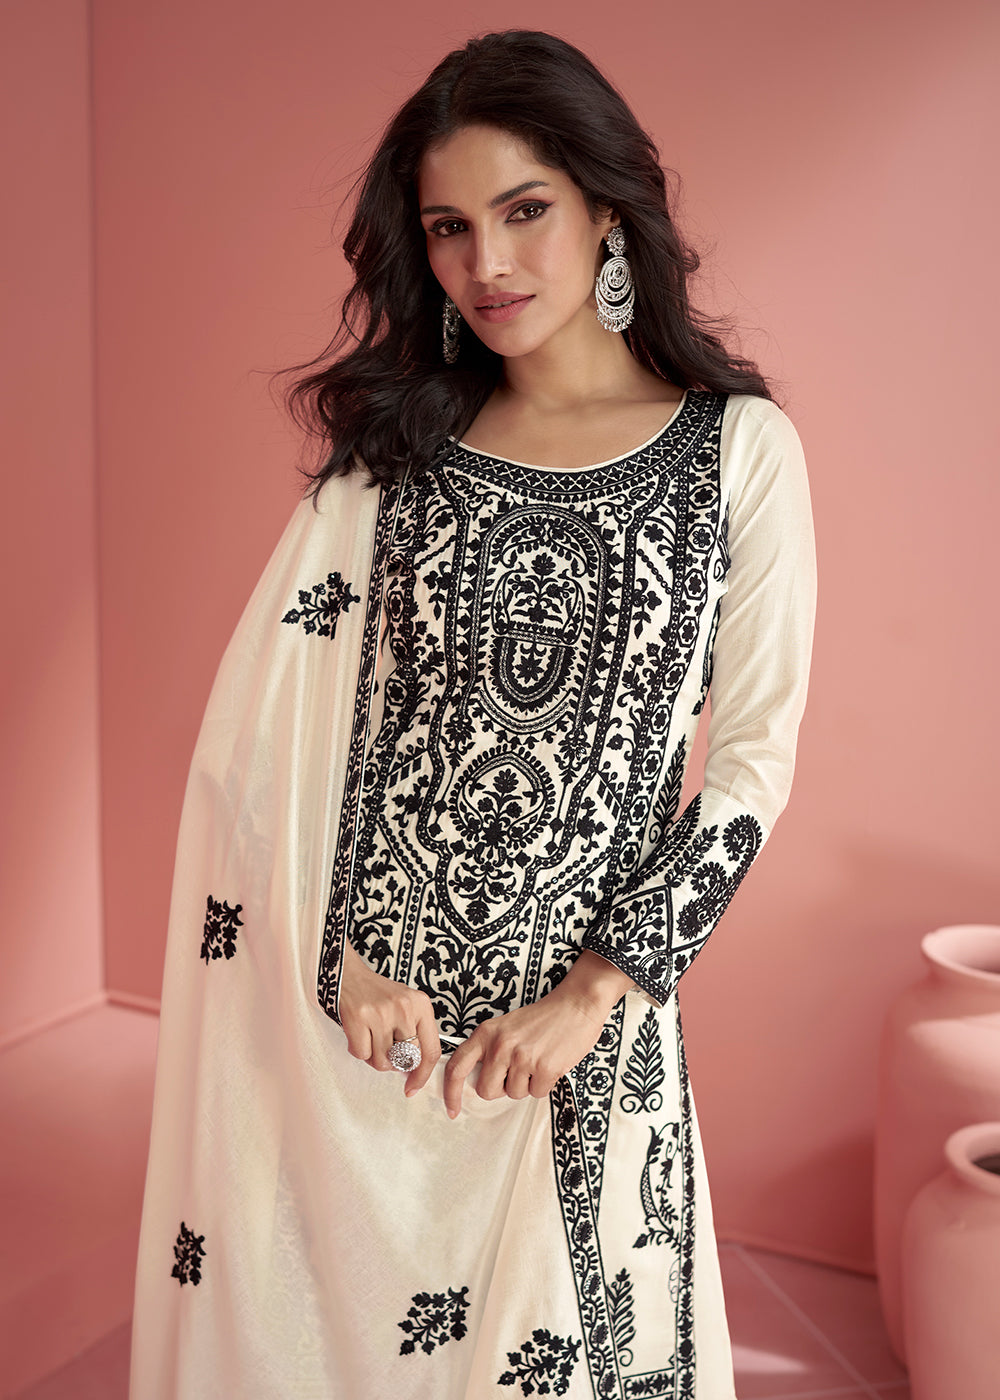 Buy Now Premium Silk Off White Embroidered Eid Style Palazzo Suit Online in USA, UK, Canada, Germany, Australia & Worldwide at Empress Clothing.